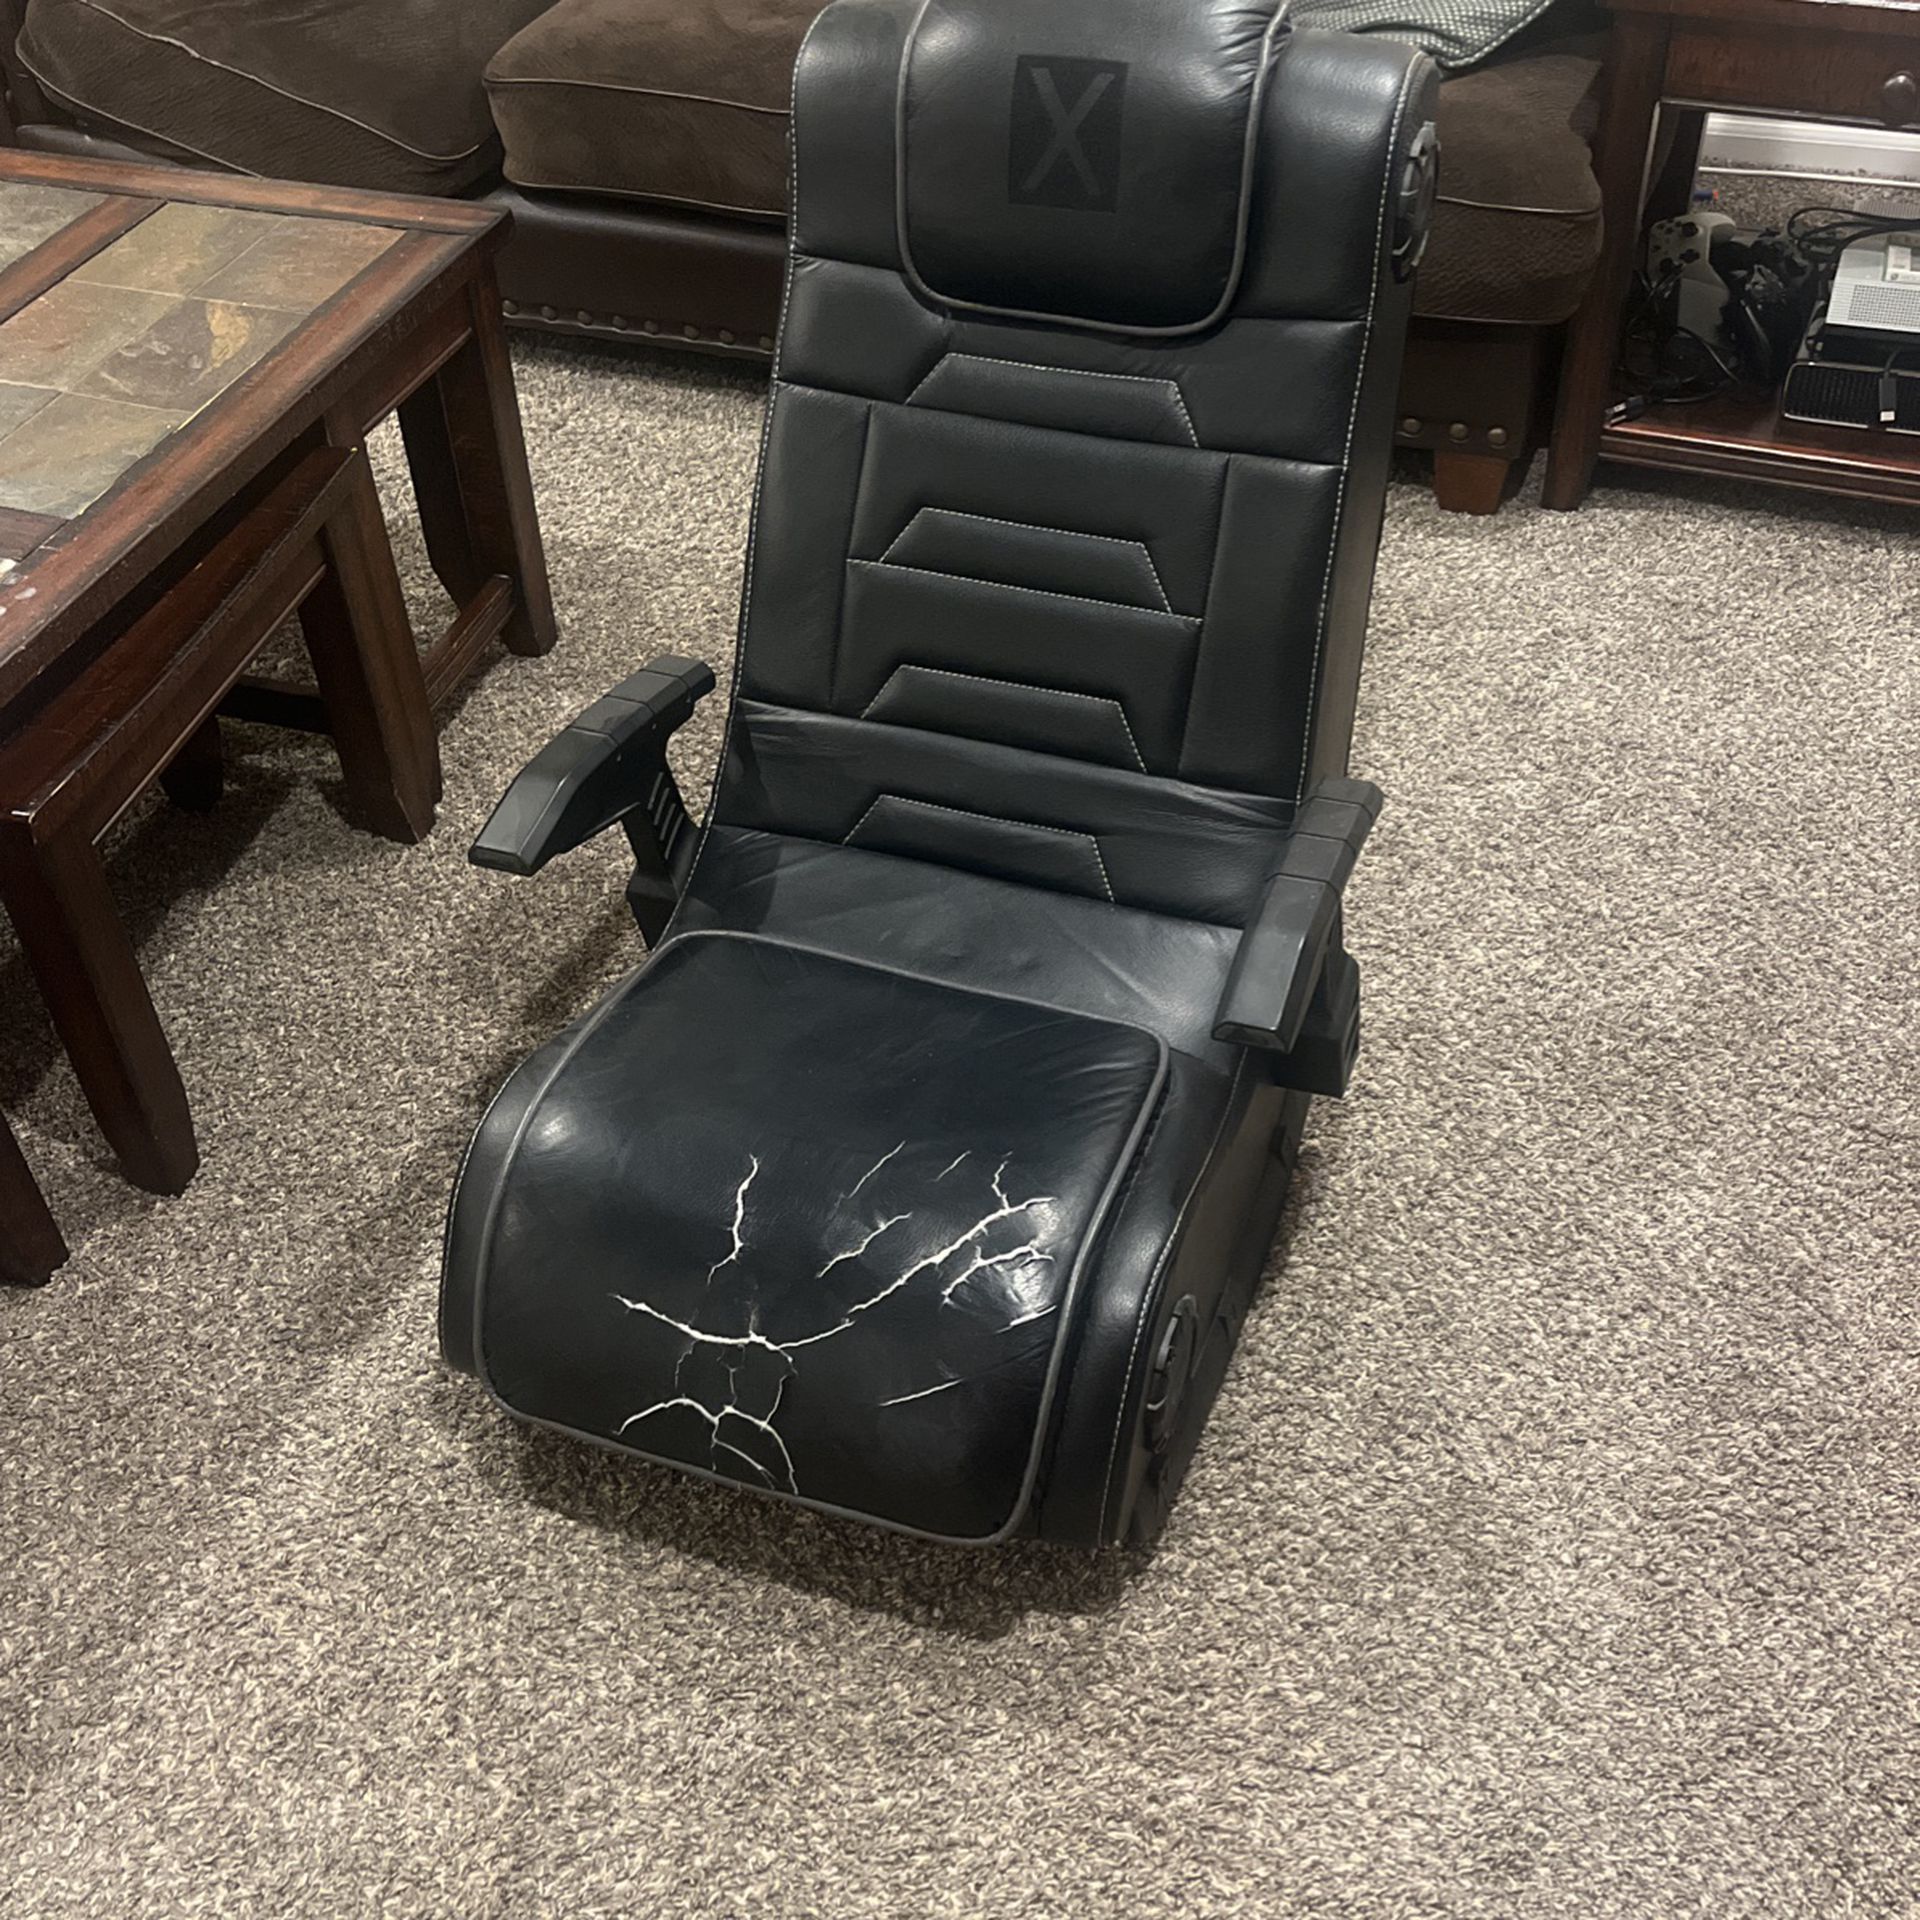 X Rocker Pro Series H3 XL Video Gaming Floor Chair with Armrests, Built-In Audio & Vibration via Wireless Bluetooth, Foldable, Vegan Leather, 300 lbs 